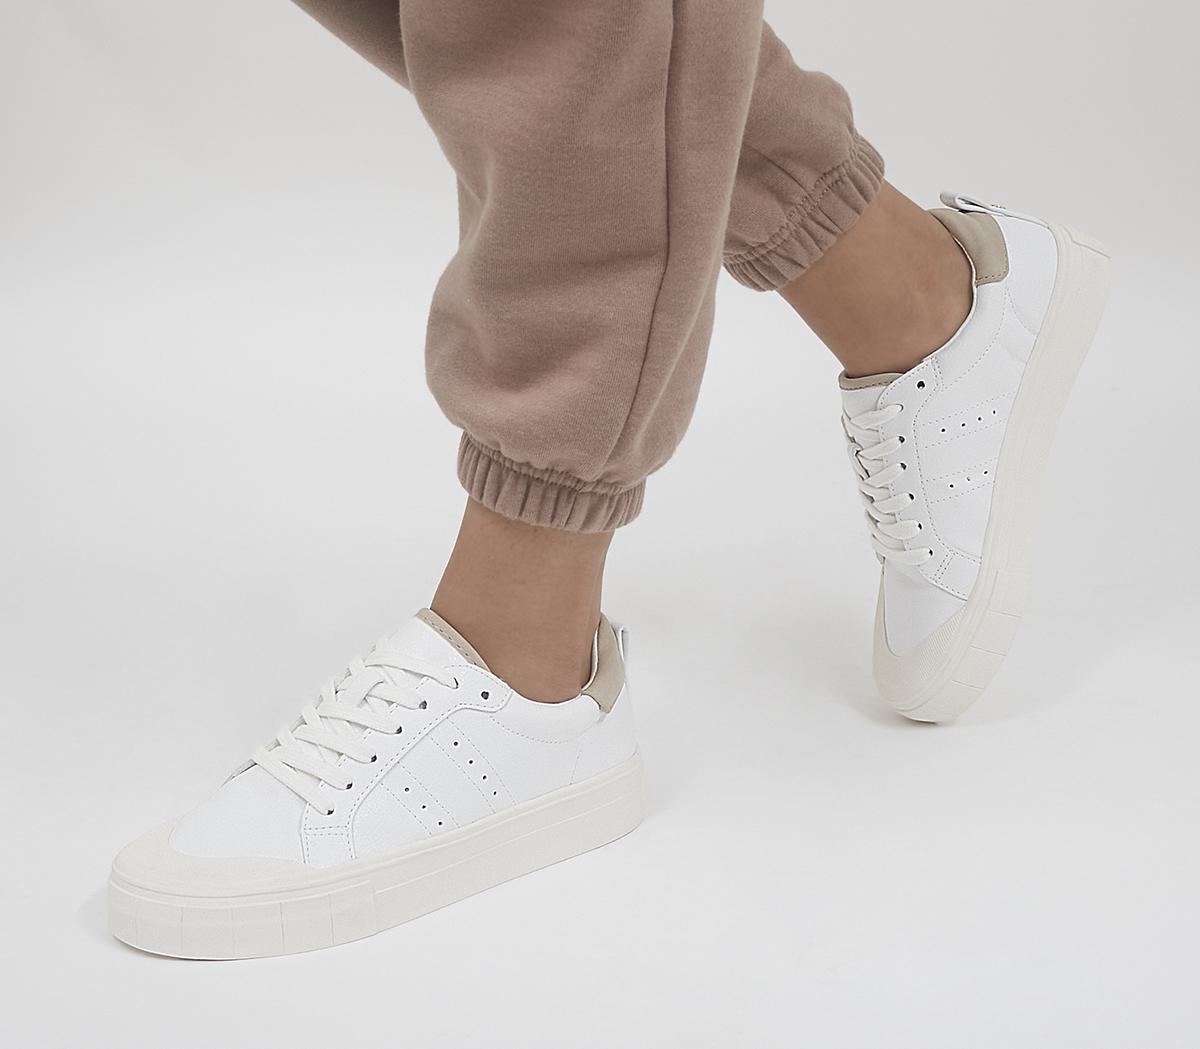 Floating Textured Sole Flatform Lace Up Trainers